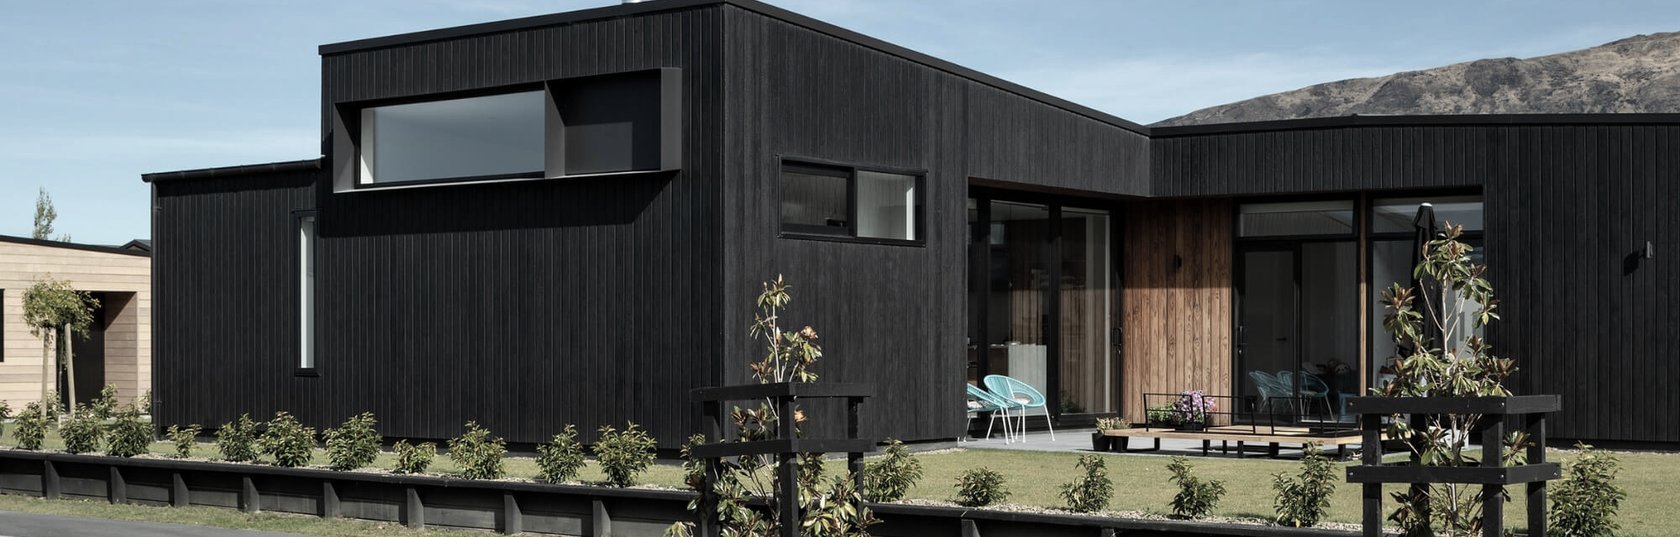 Timber cladding - advantages and disadvantages